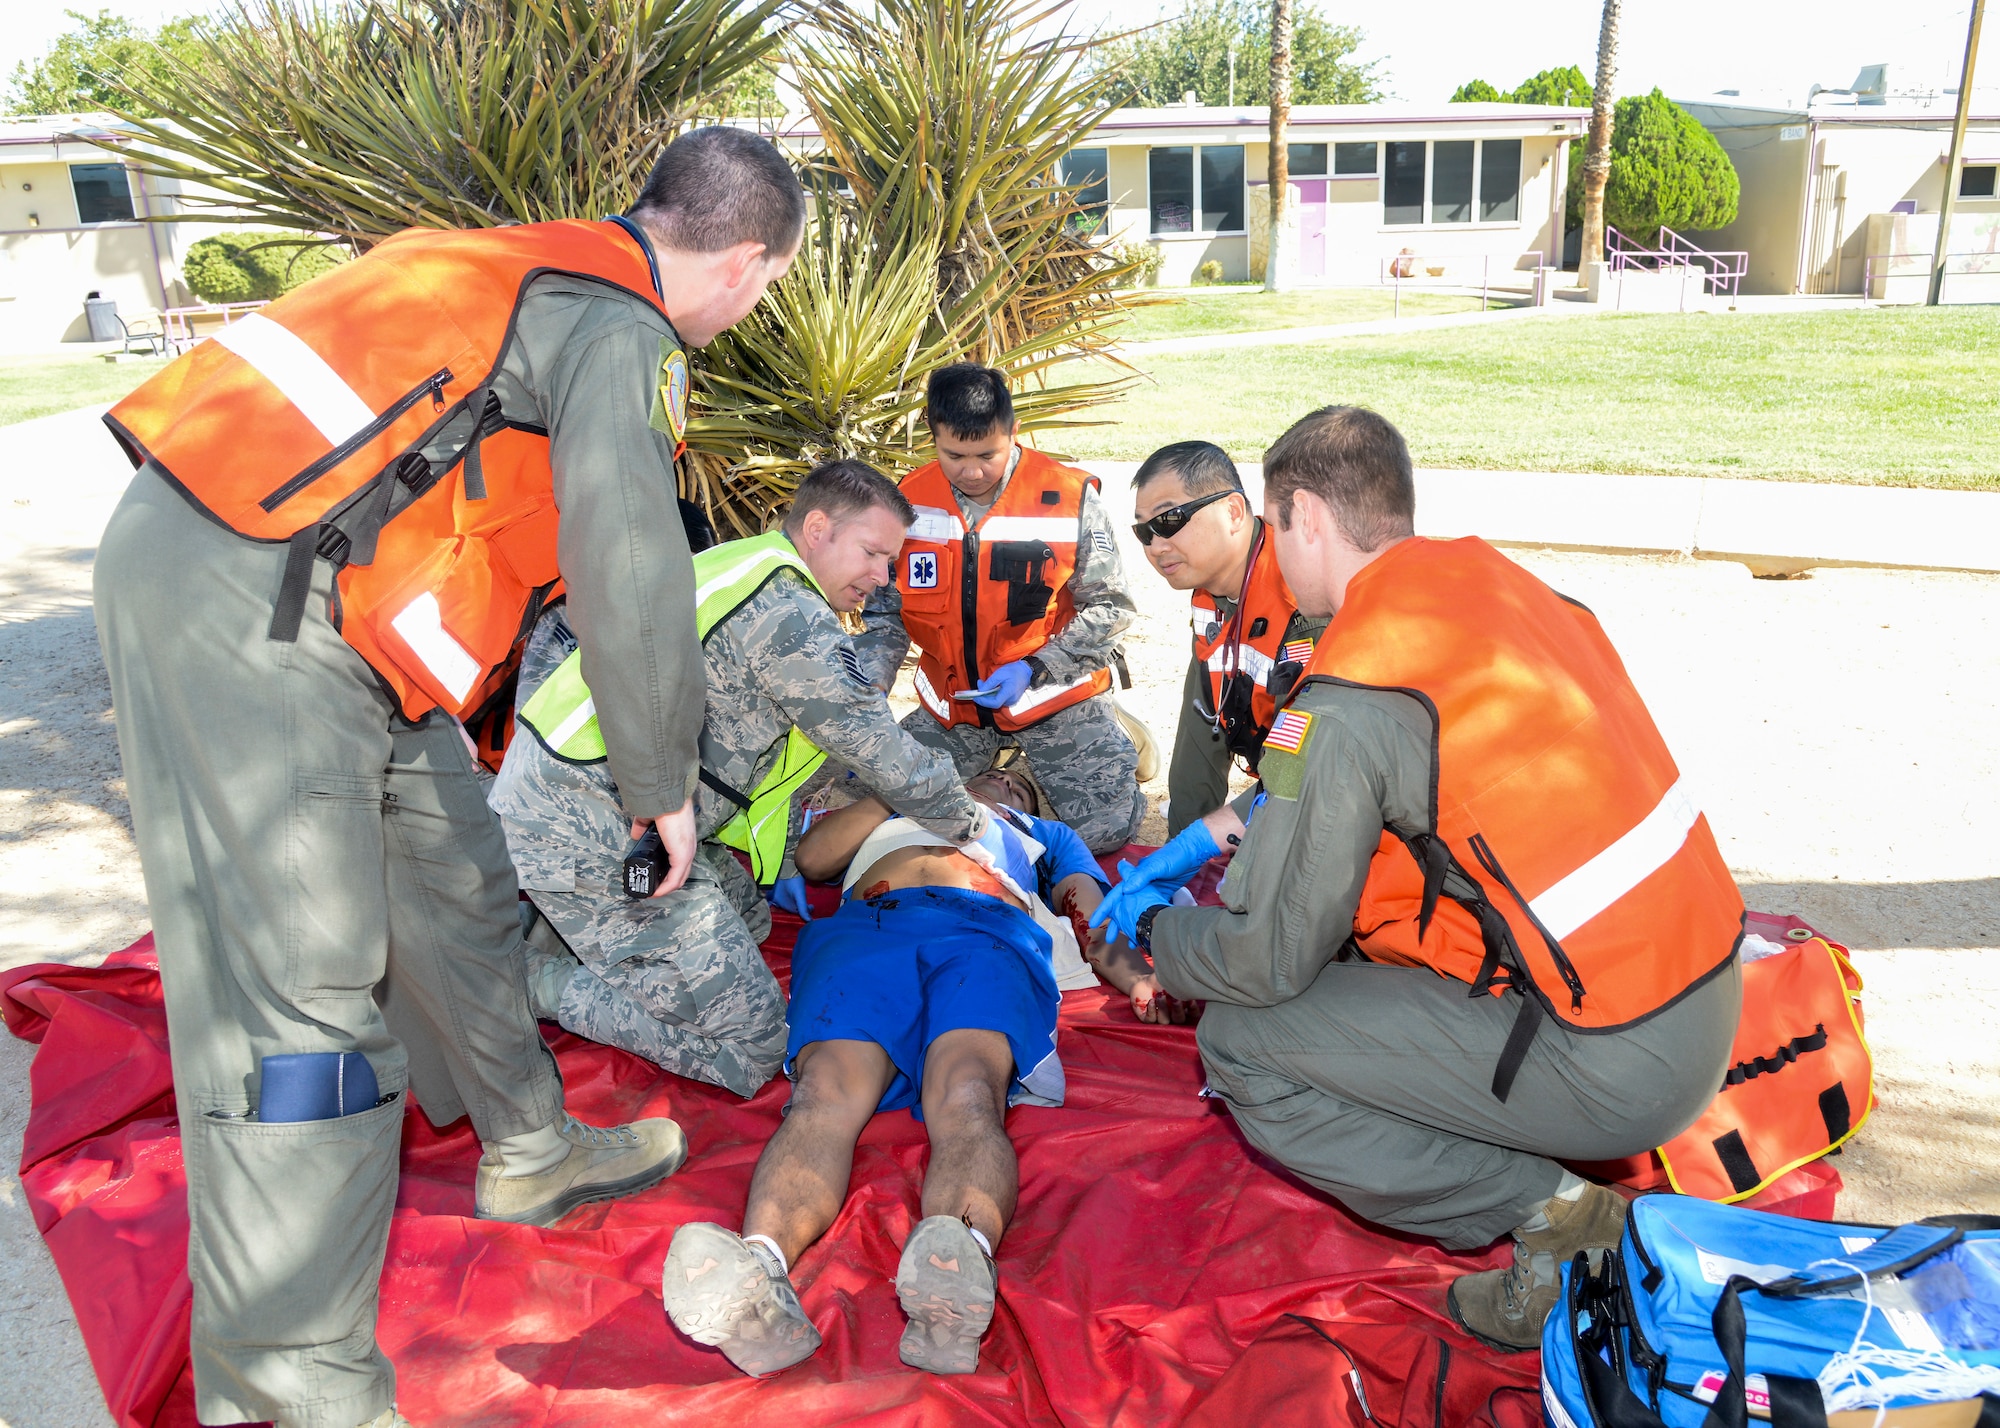 An emergency medical response crew treats a shooting victim during an active shooter scenario exercise at Desert Junior-Senior High School at Edwards Air Force Base, California, Sept. 18, 2018. (U.S. Air Force photo by Giancarlo Casem)